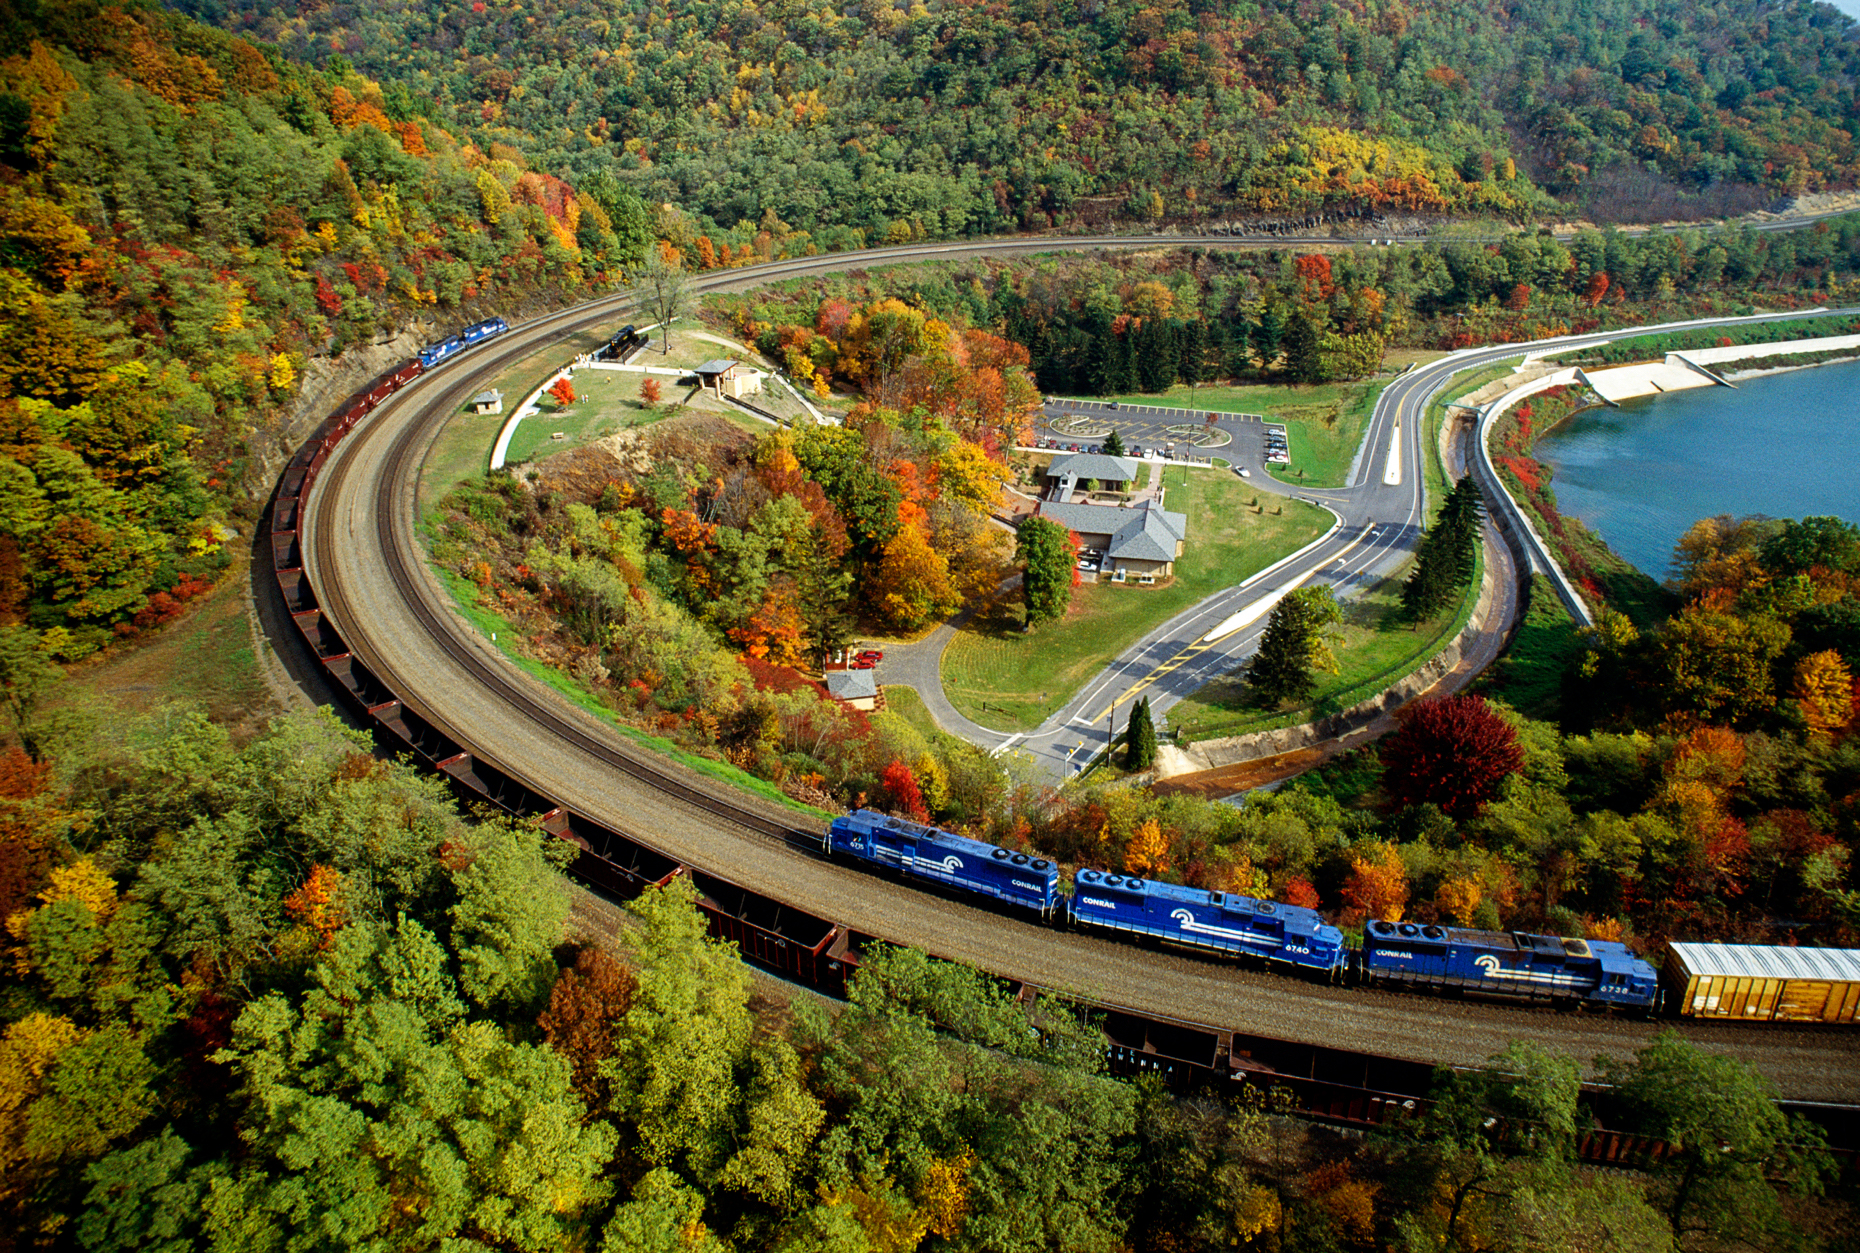 Aerial view of the Horseshoe Curve with colorful autumn foliage.